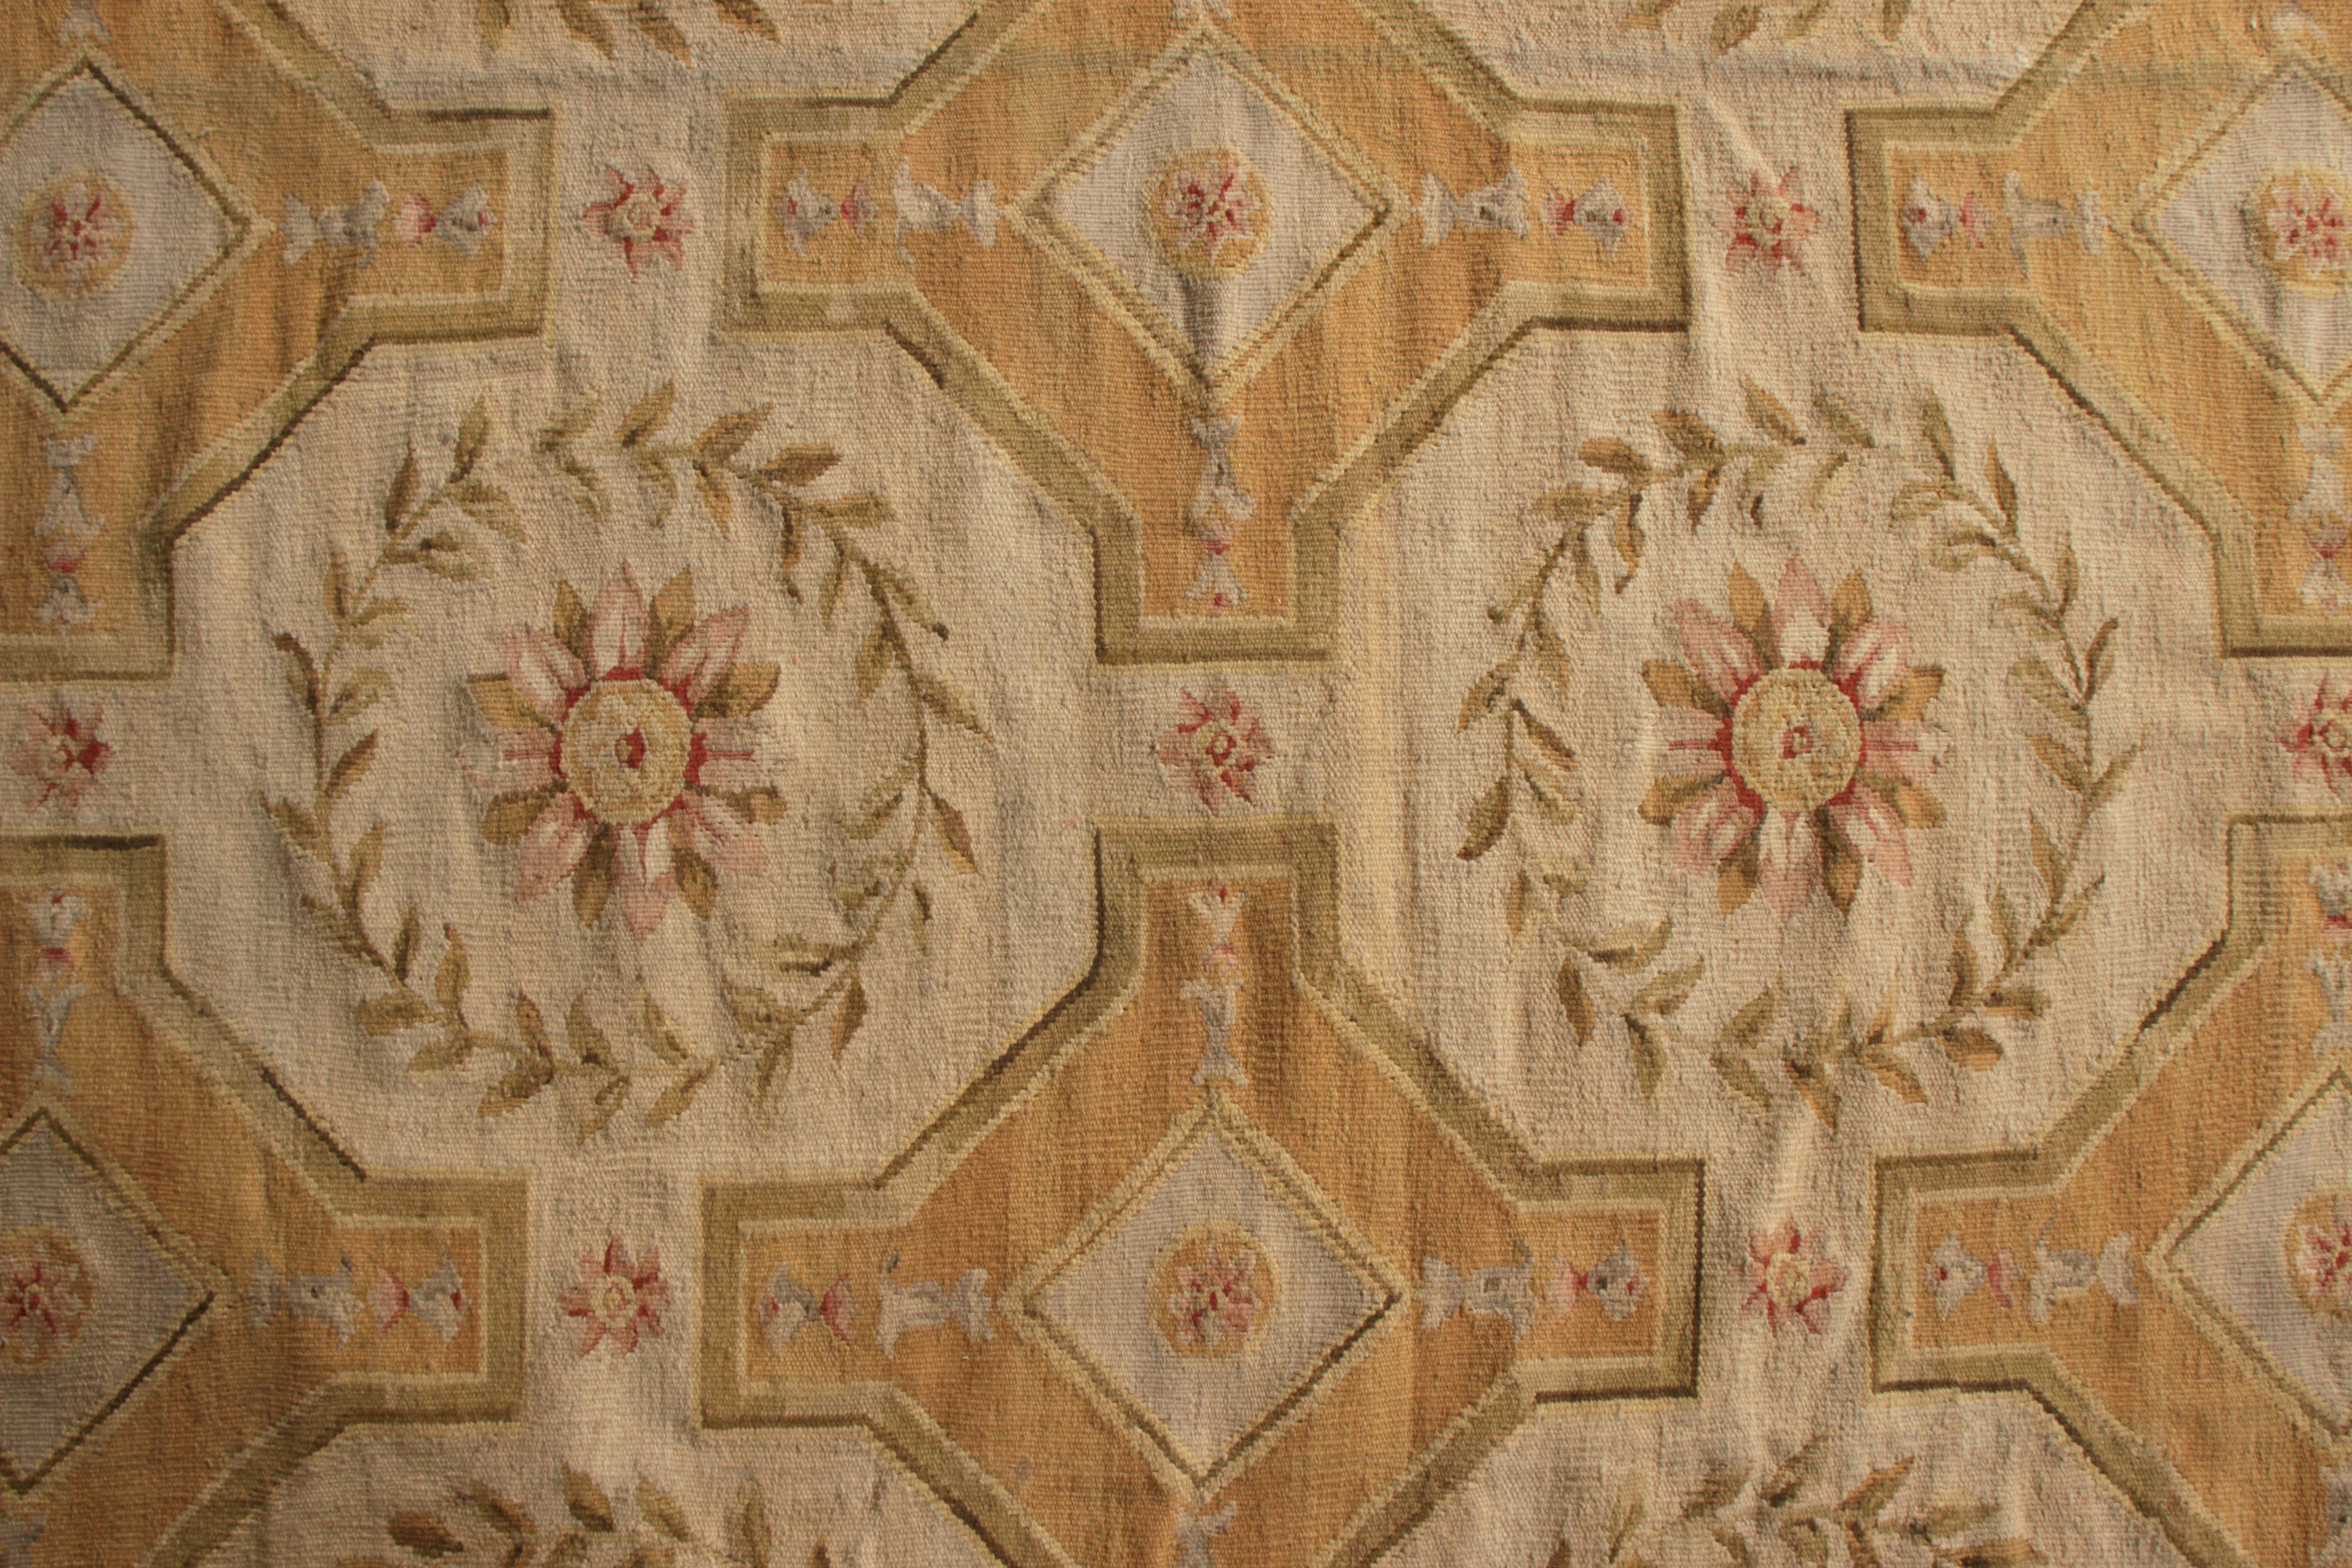 Chinese Rug & Kilim's Aubusson Style Flat Weave Beige-Brown Floral Pattern For Sale